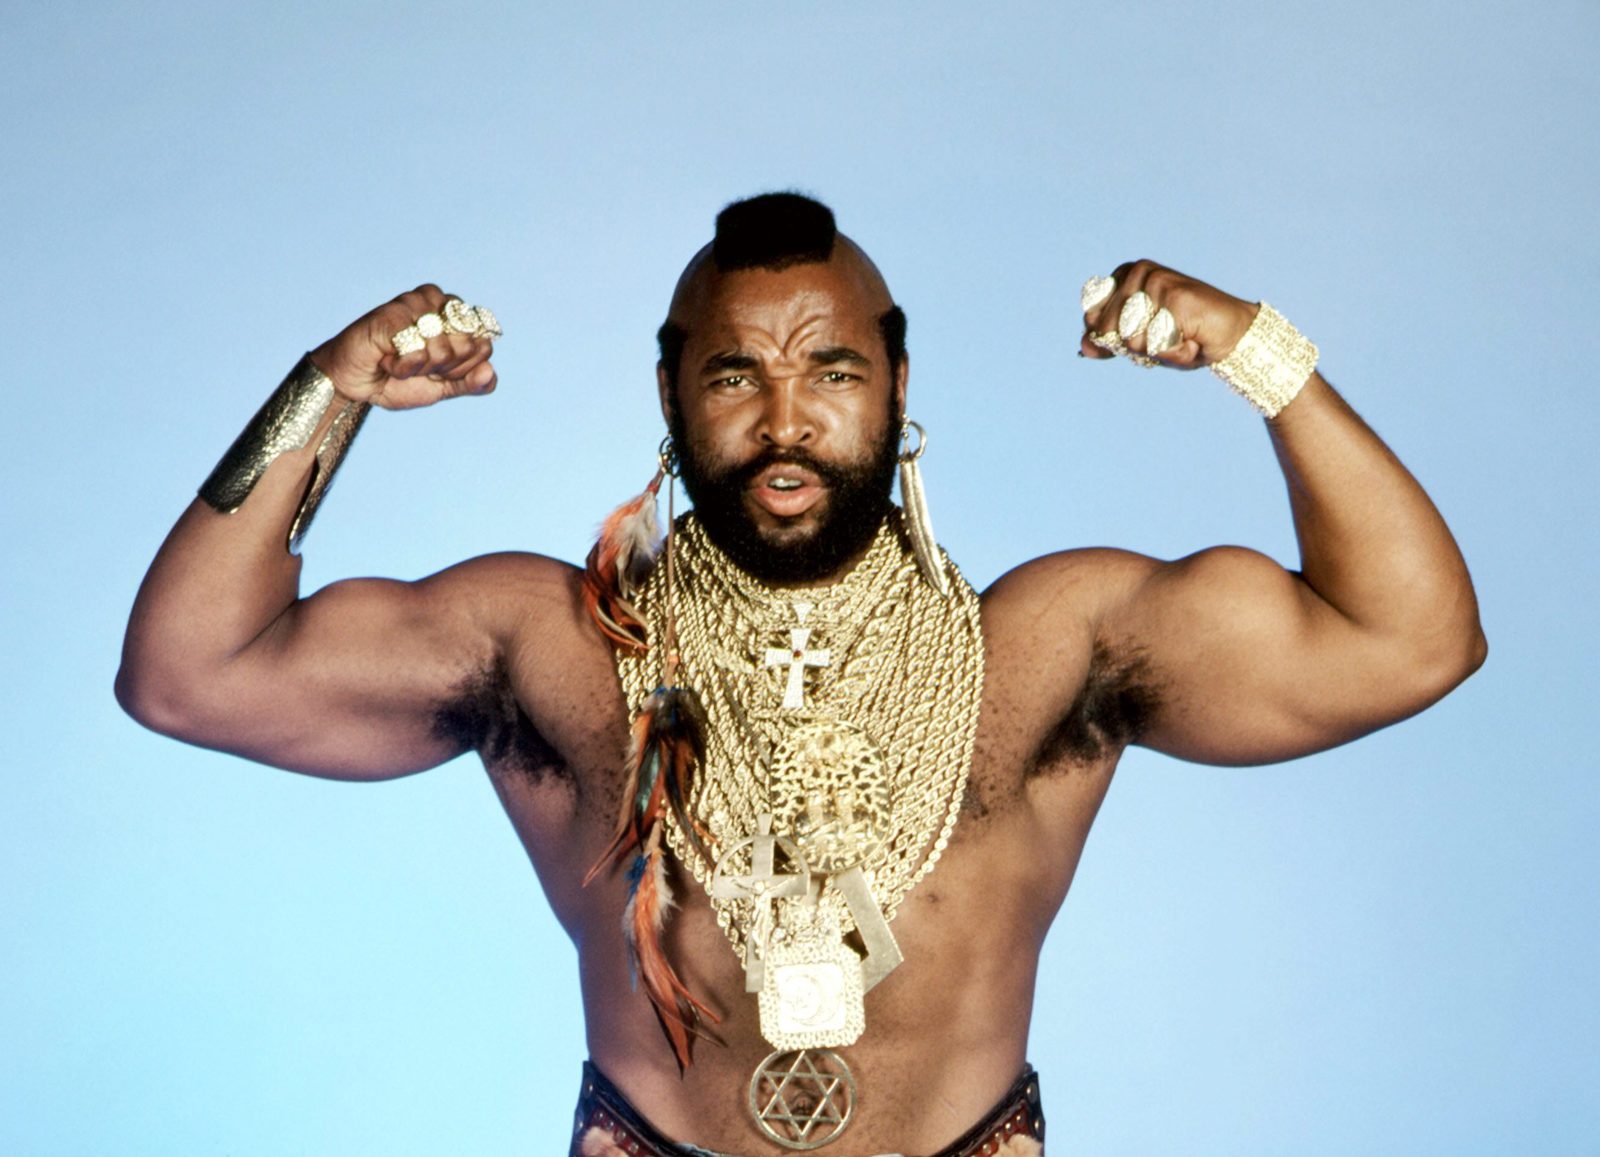 The bouncer king of the USA! Mr. T (info+video+photo) - Mr. Ti, Mike Tyson, Sylvester Stallone, Rocky, Nostalgia, Cinema, news, What, Video, Longpost